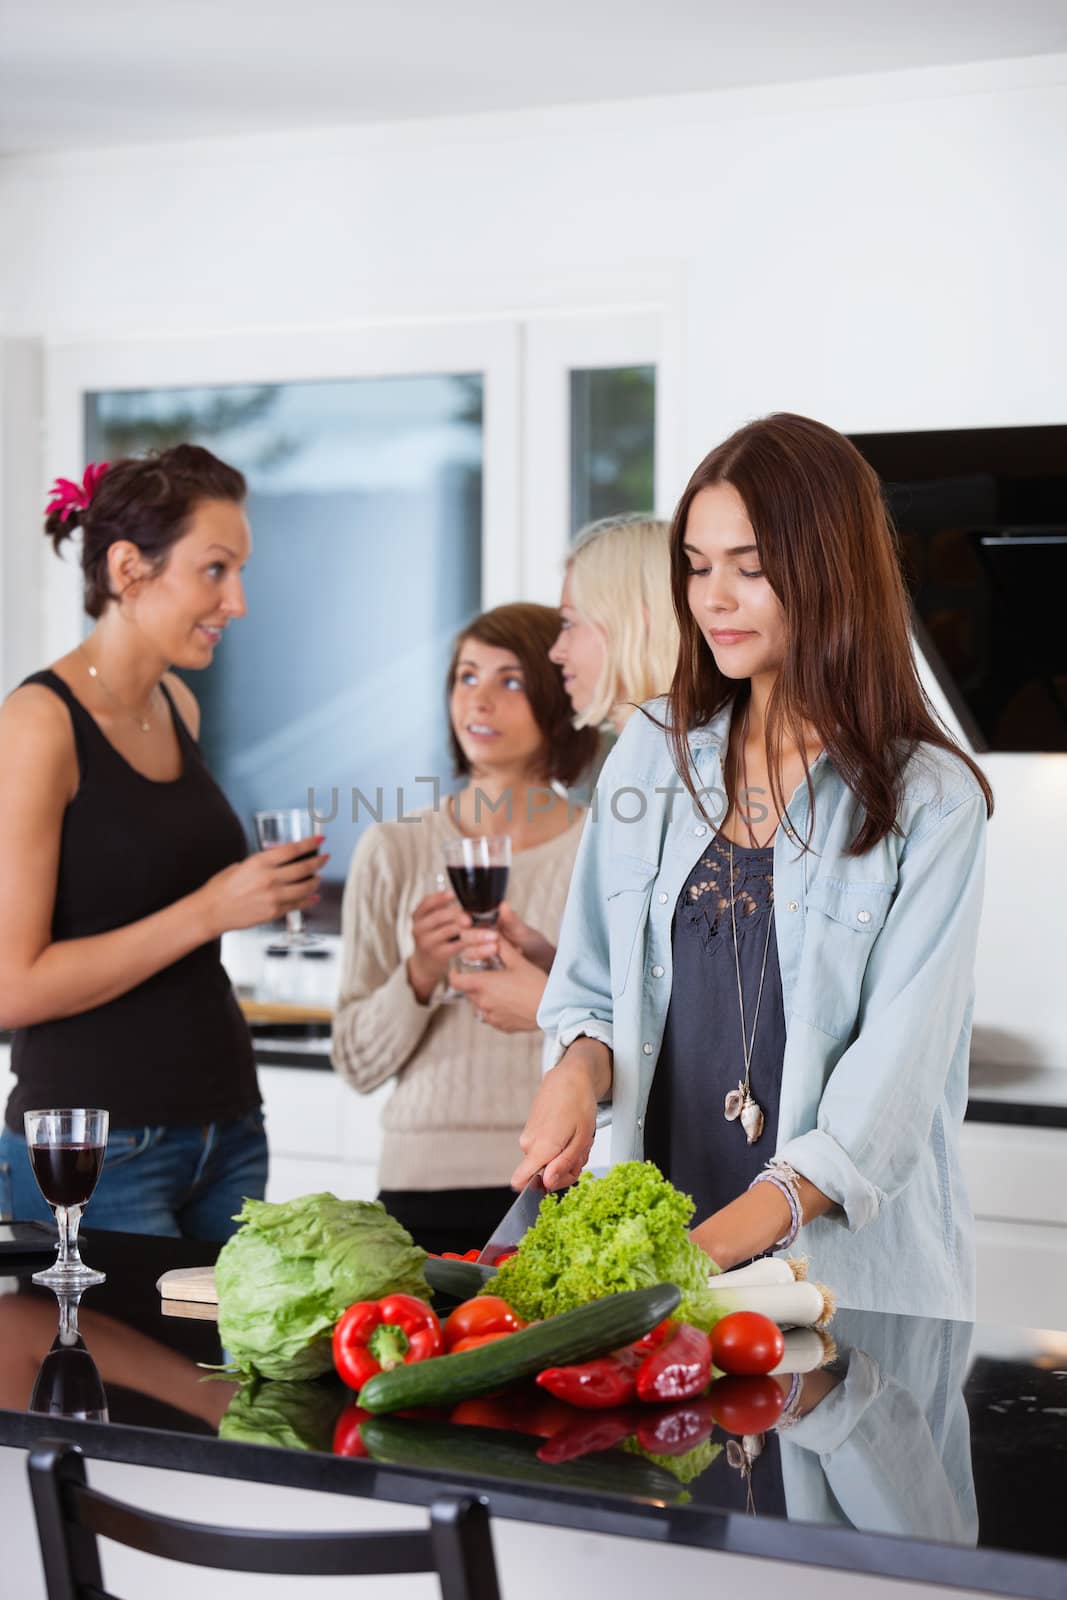 Pretty female cutting vegetables while her friends having drink in background